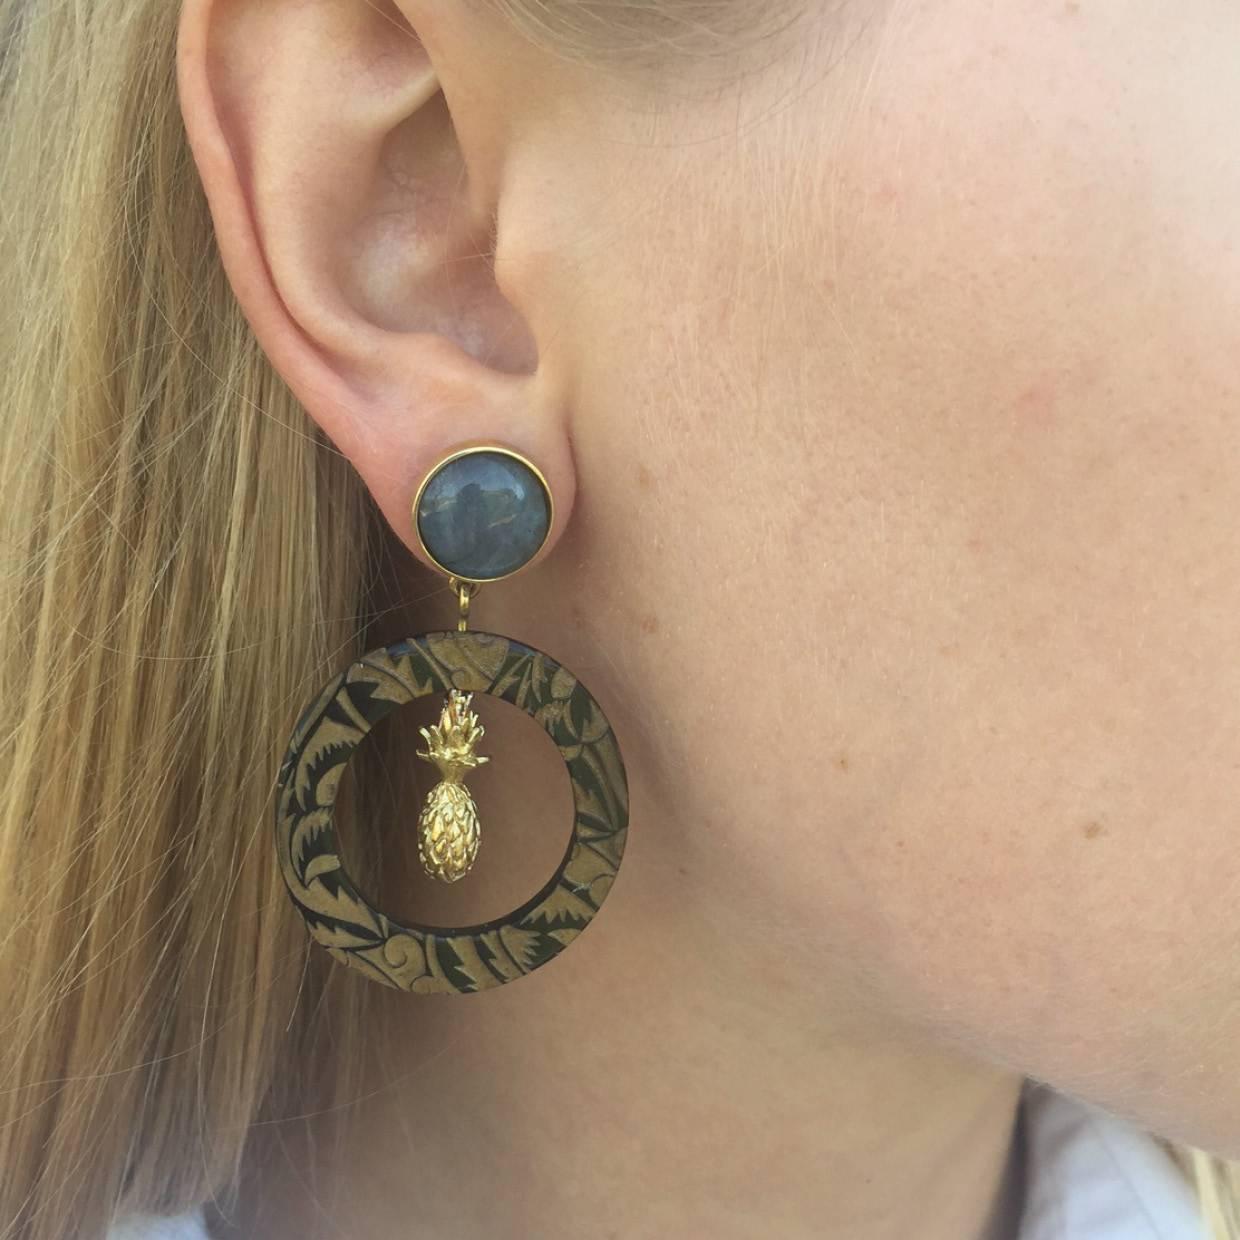 These engraved African cow horn hoops are set with the finest labradorite gemstone in a blue-gold color; sourced from ethical mines in Madagascar, Africa. 

Crafted by artisans in Kenya and finished by hand in London with solid silver pin-backs for